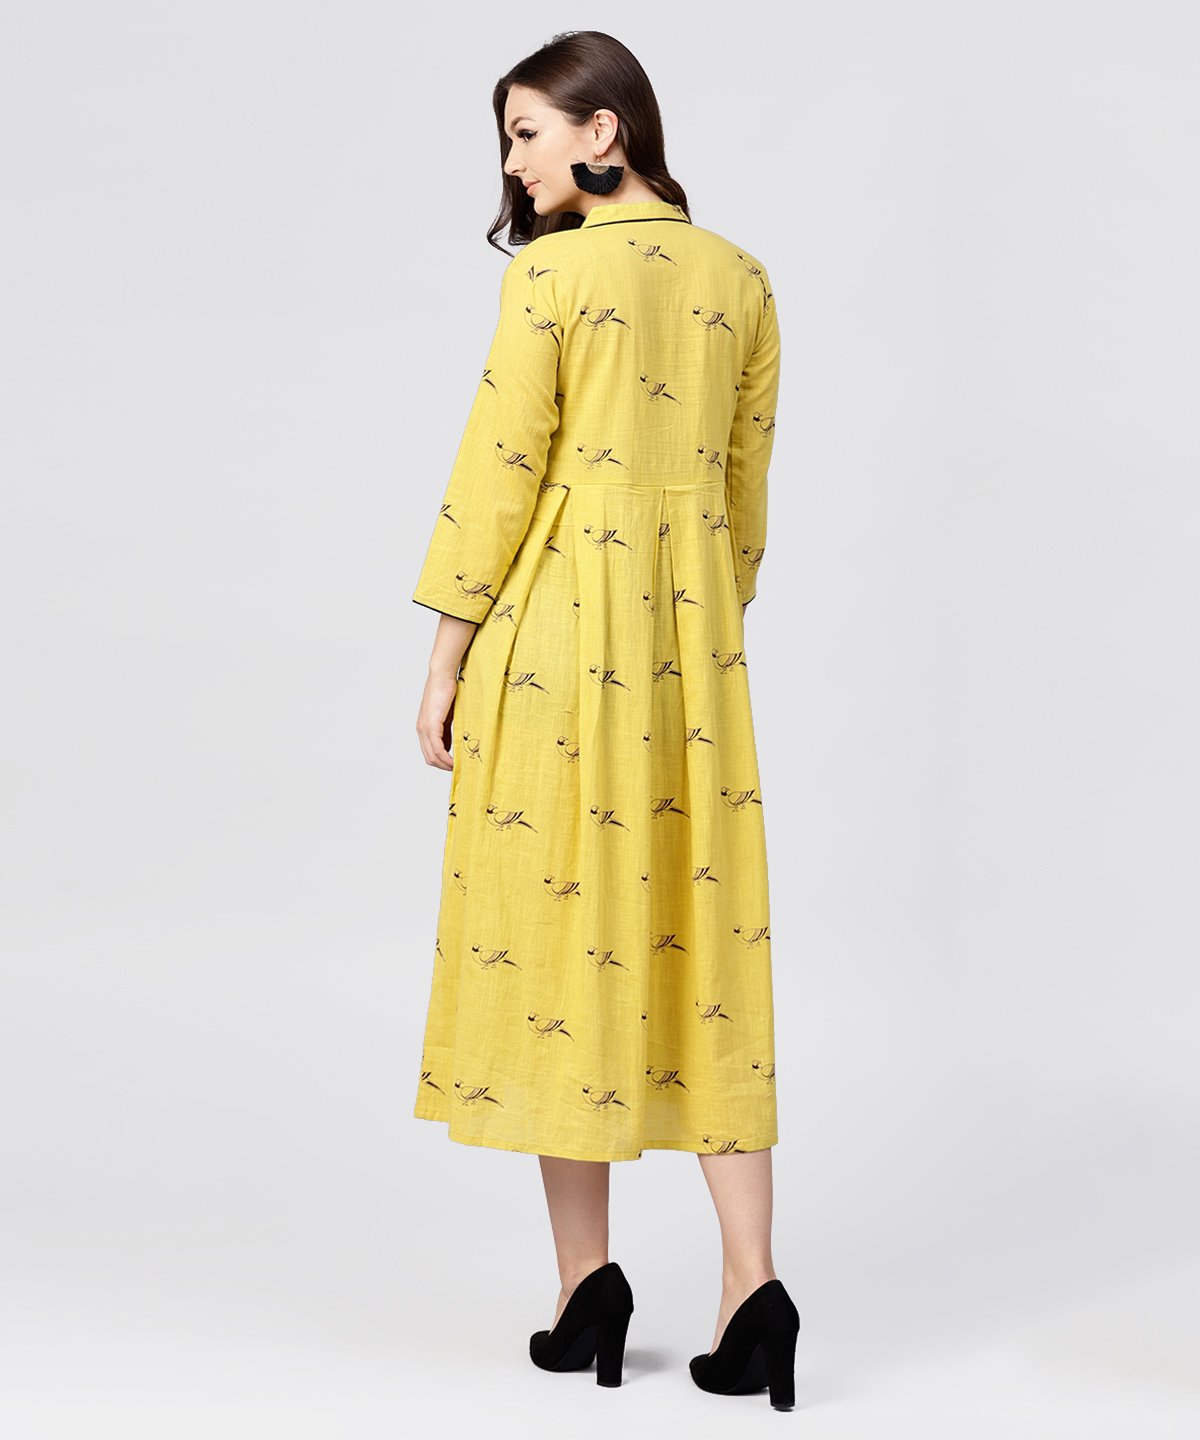 Women's Mustard Full Sleeves Cotton Maxi Dress With Madarin Collar And Front Placket - Nayo Clothing